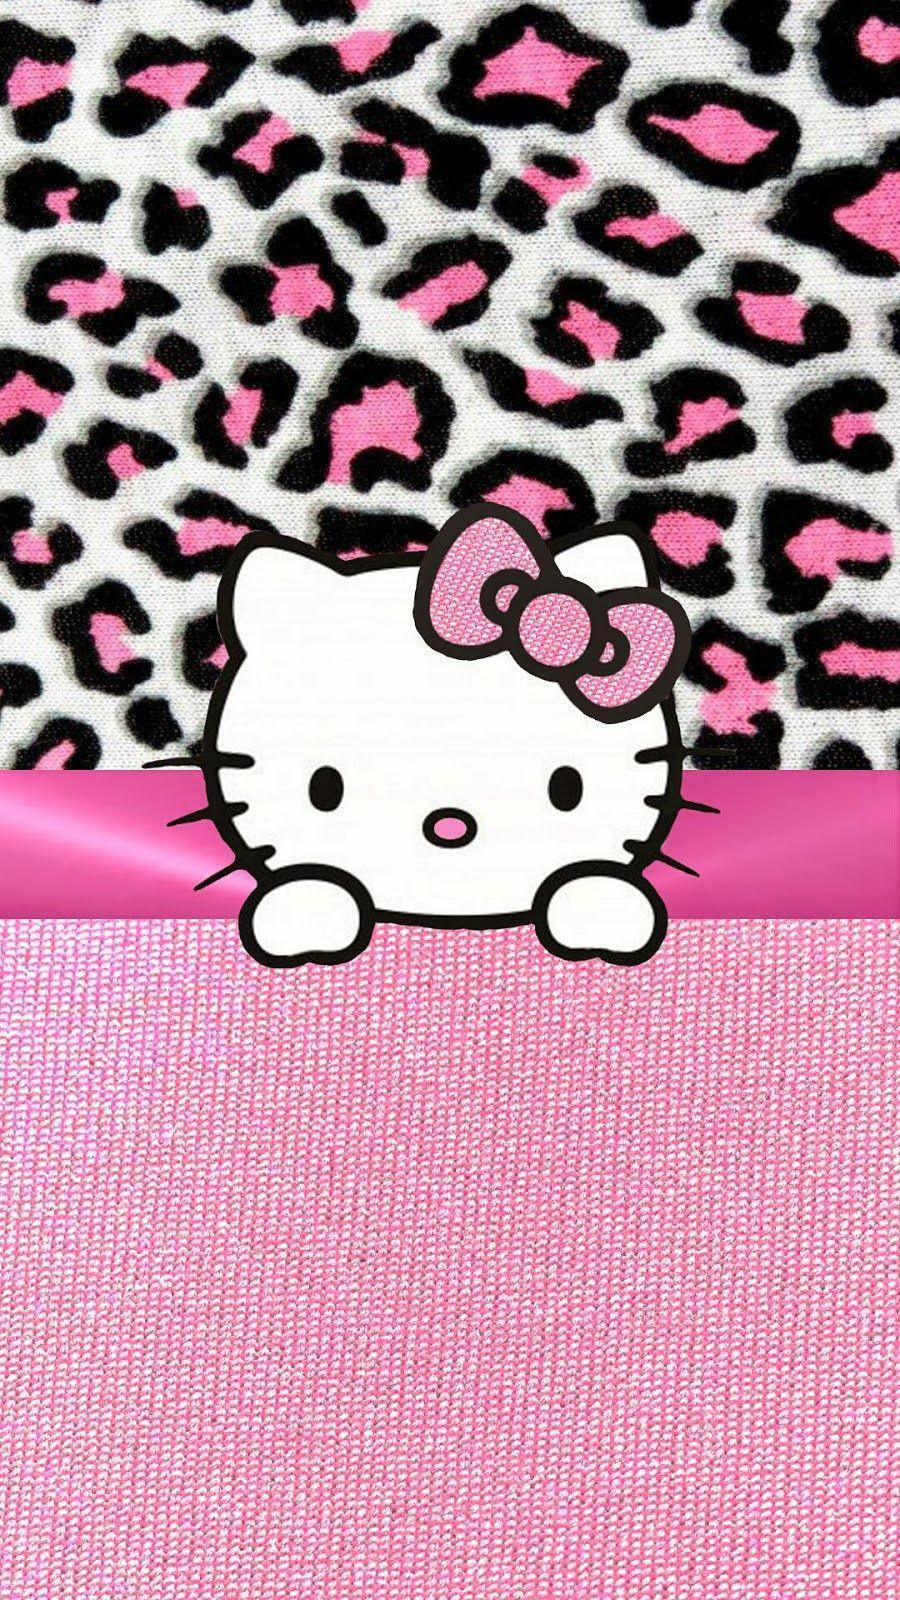 100+] Pink Hello Kitty Backgrounds